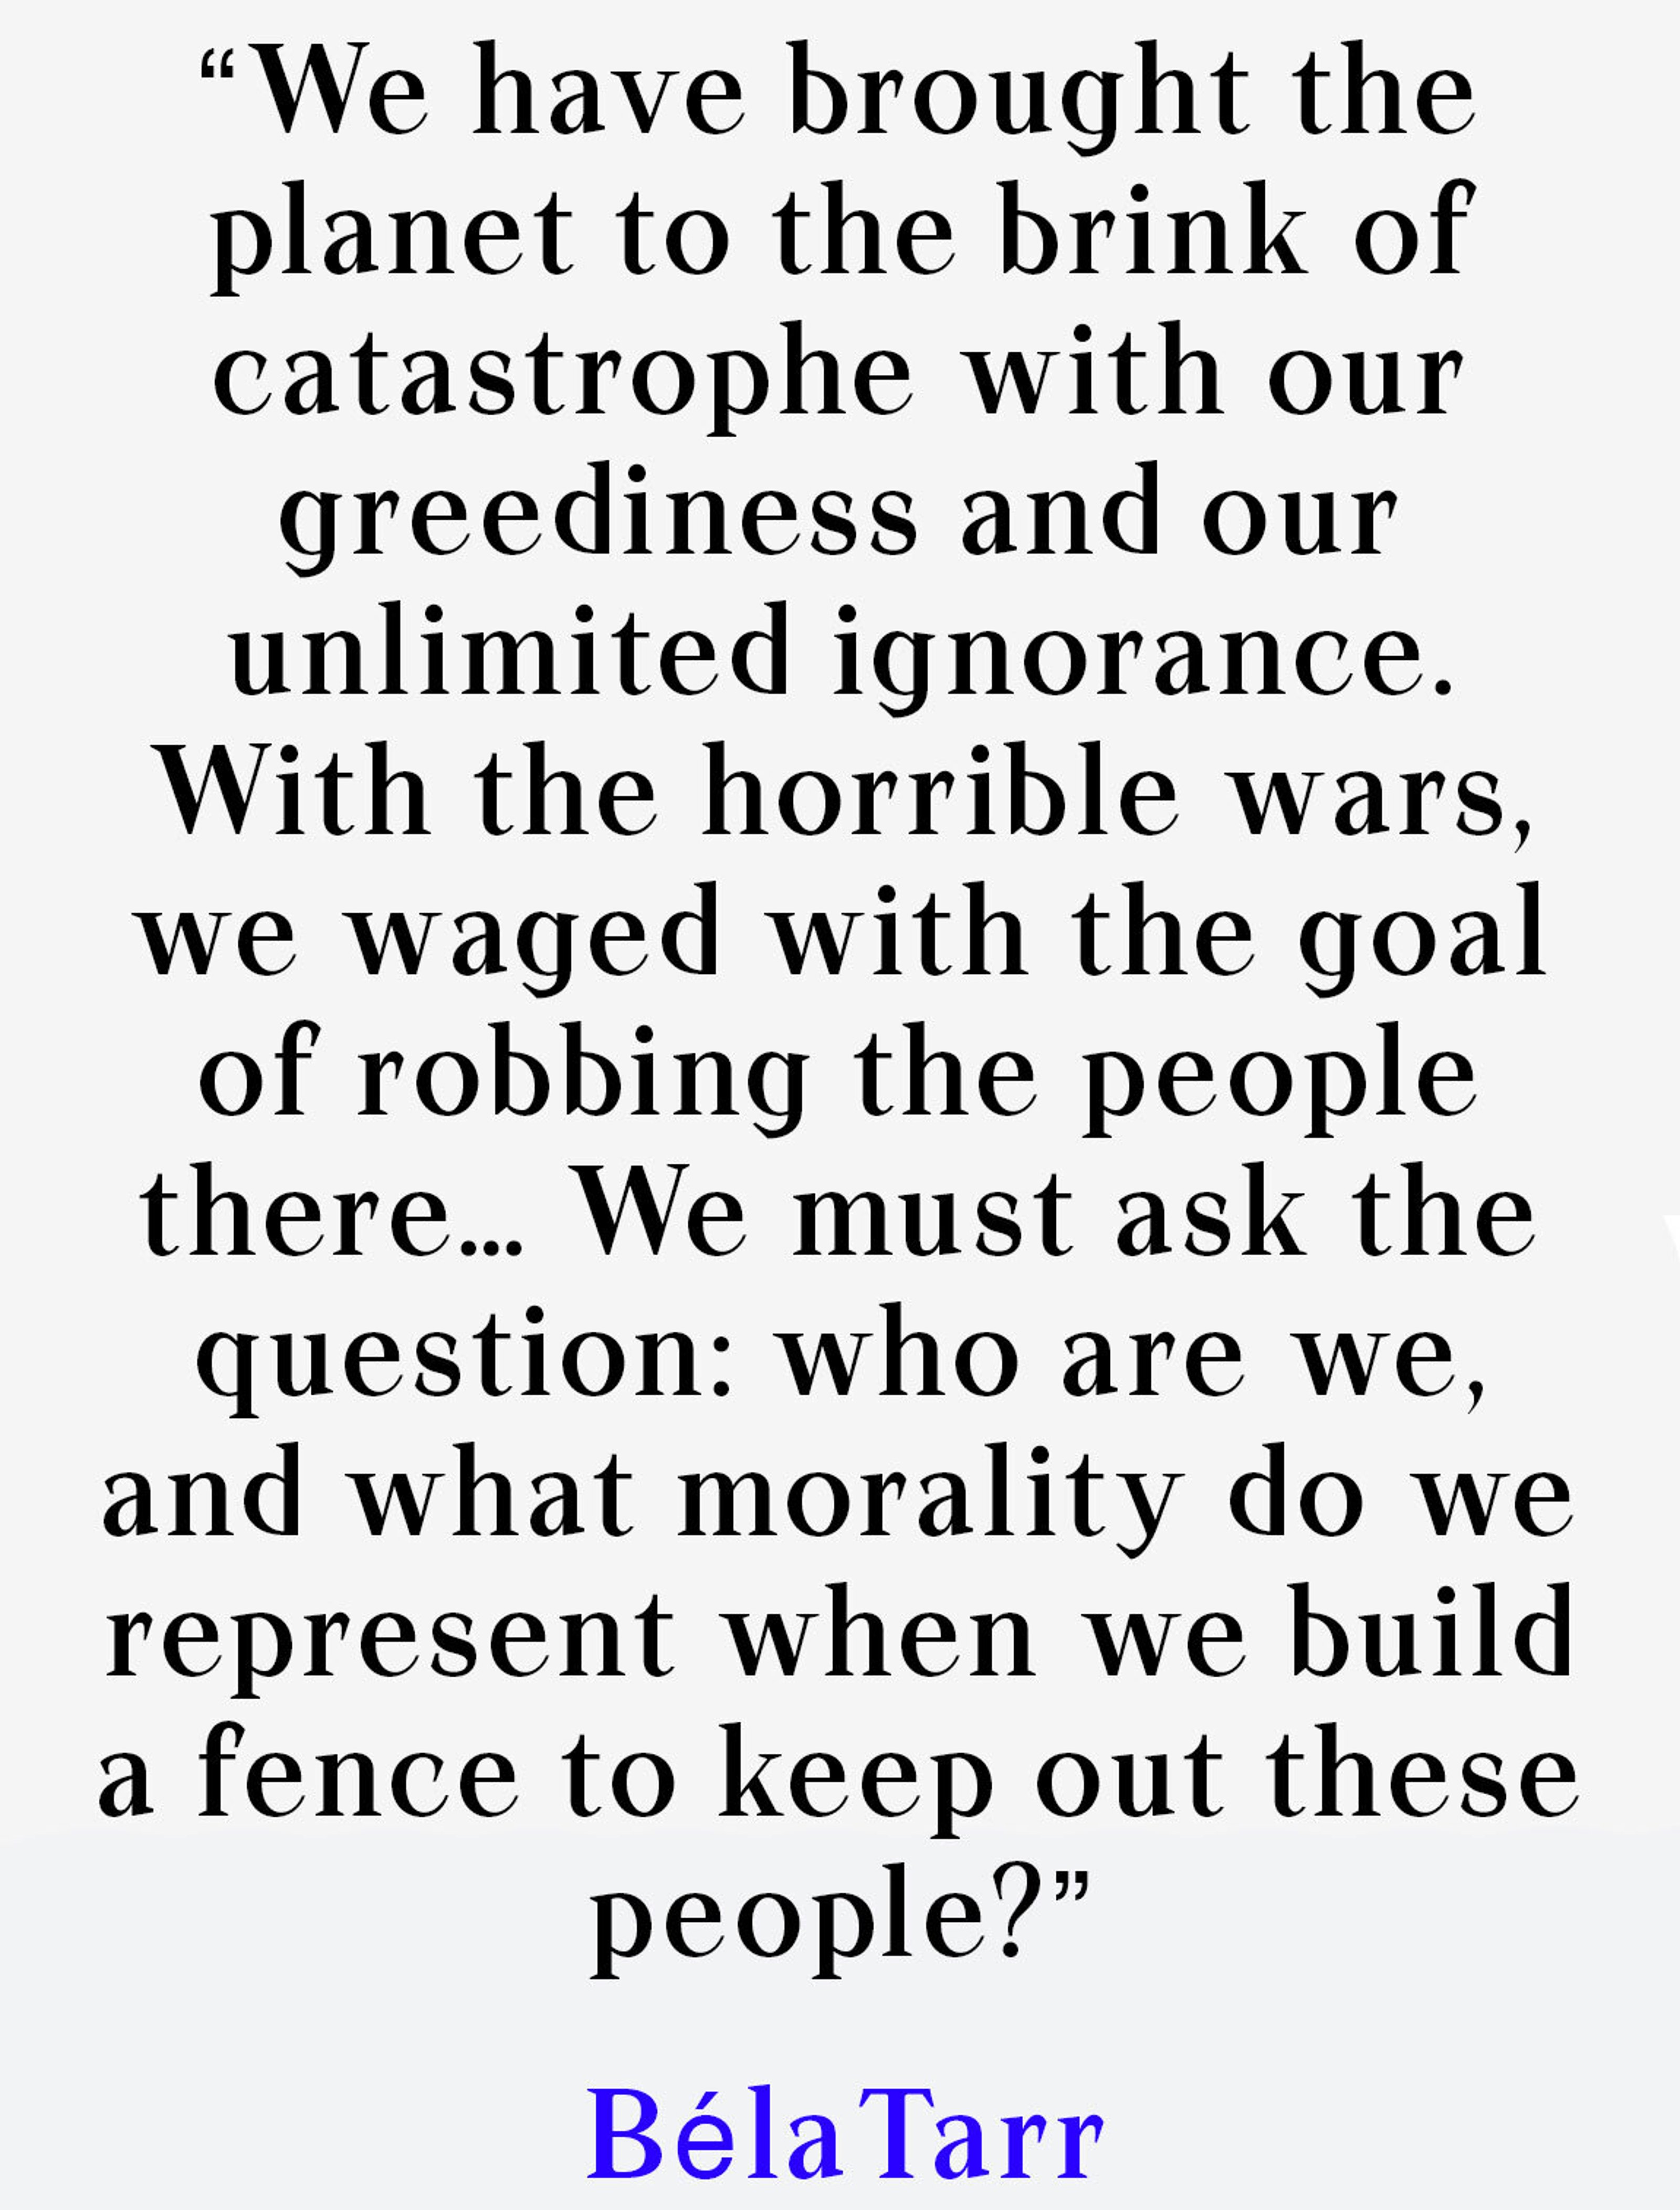 “We have brought the planet to the brink of catastrophe with our greediness and our unlimited ignorance. With the horrible wars, we waged with the goal of robbing the people there… We must ask the question: who are we, and what morality do we represent when we build a fence to keep out these people?”